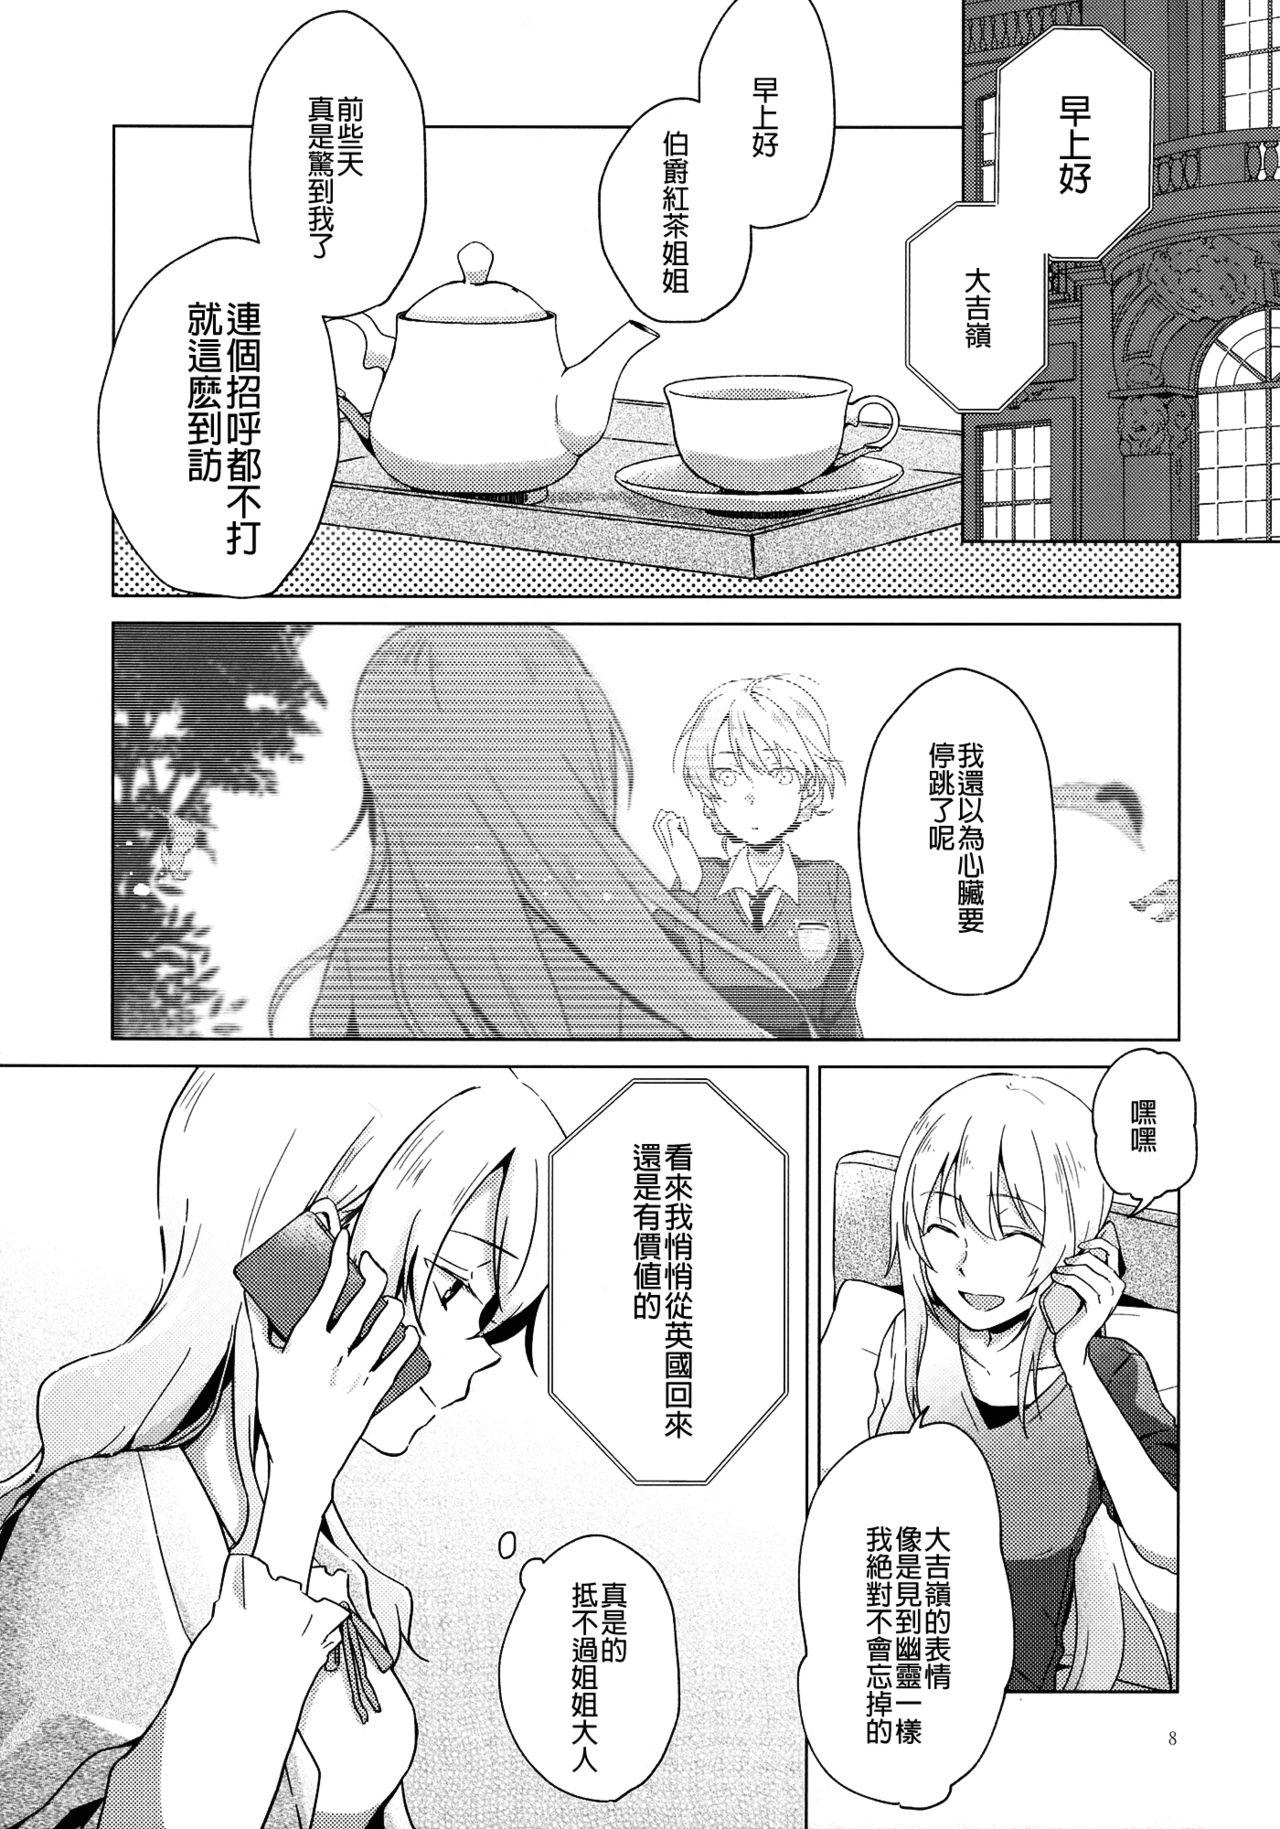 Chupa Over Time | 超時 - Girls und panzer Gay Longhair - Page 8